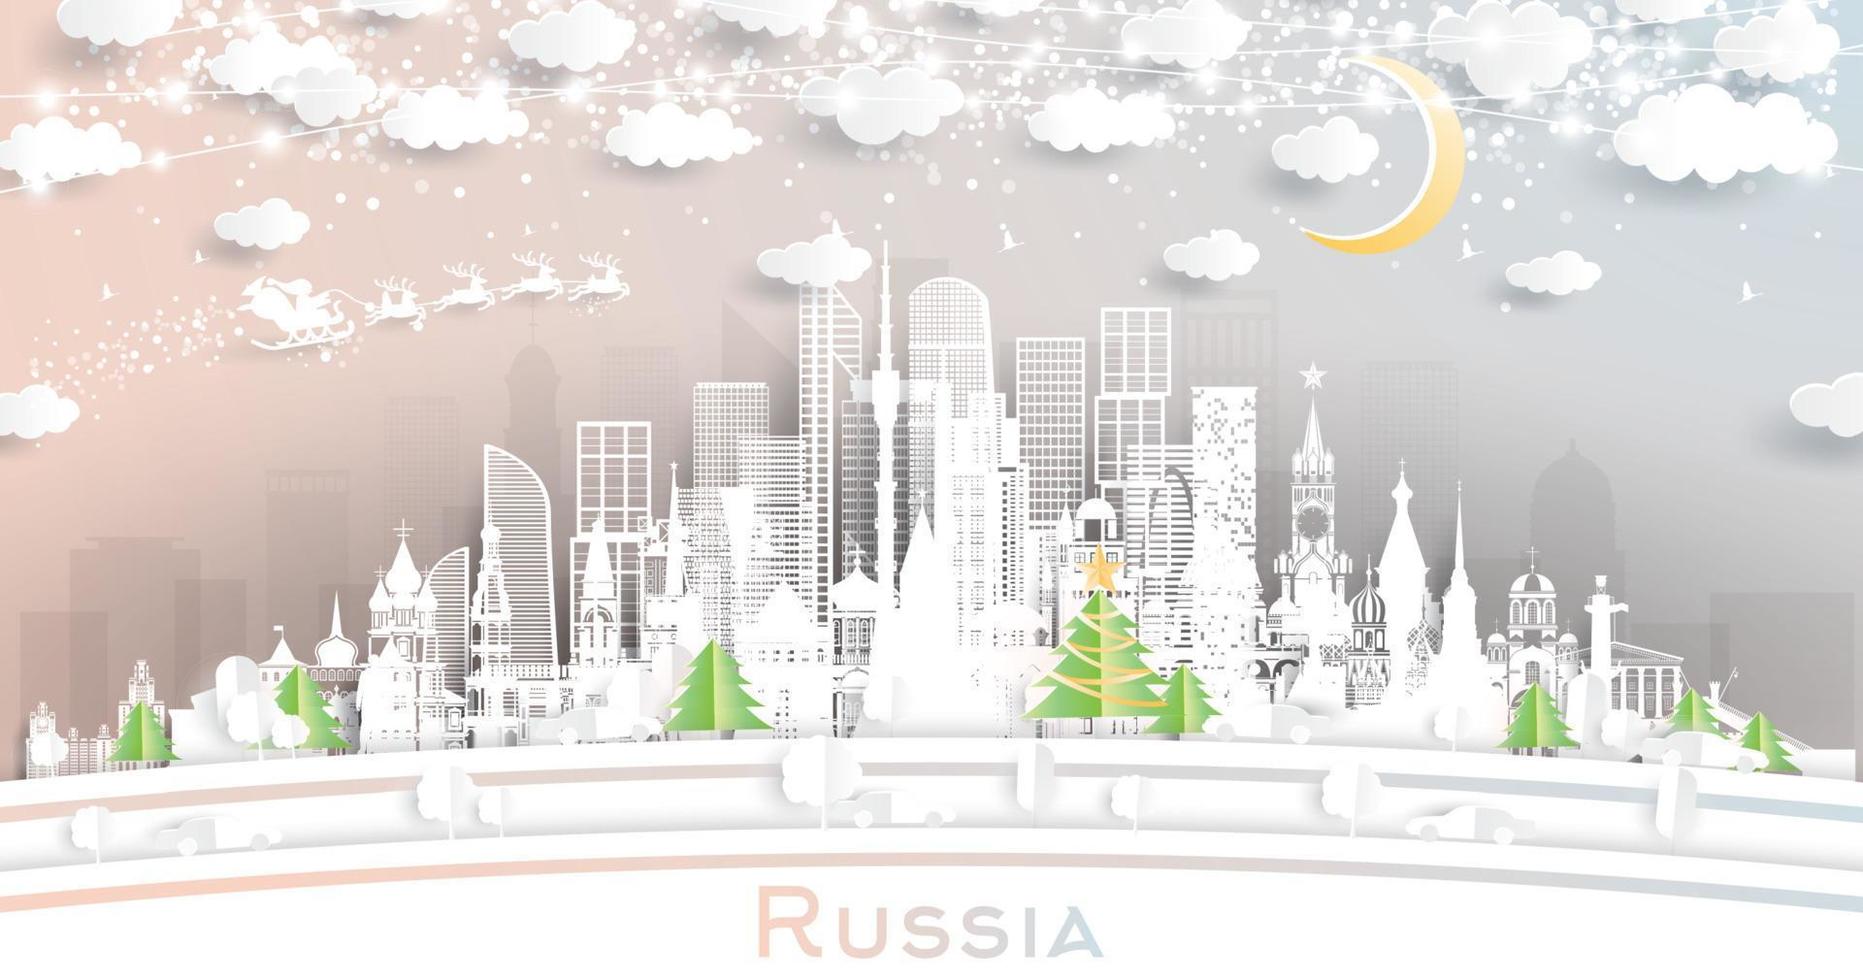 Russia Winter Skyline in Paper Cut Style with Snowflakes, Moon and Neon Garland. vector